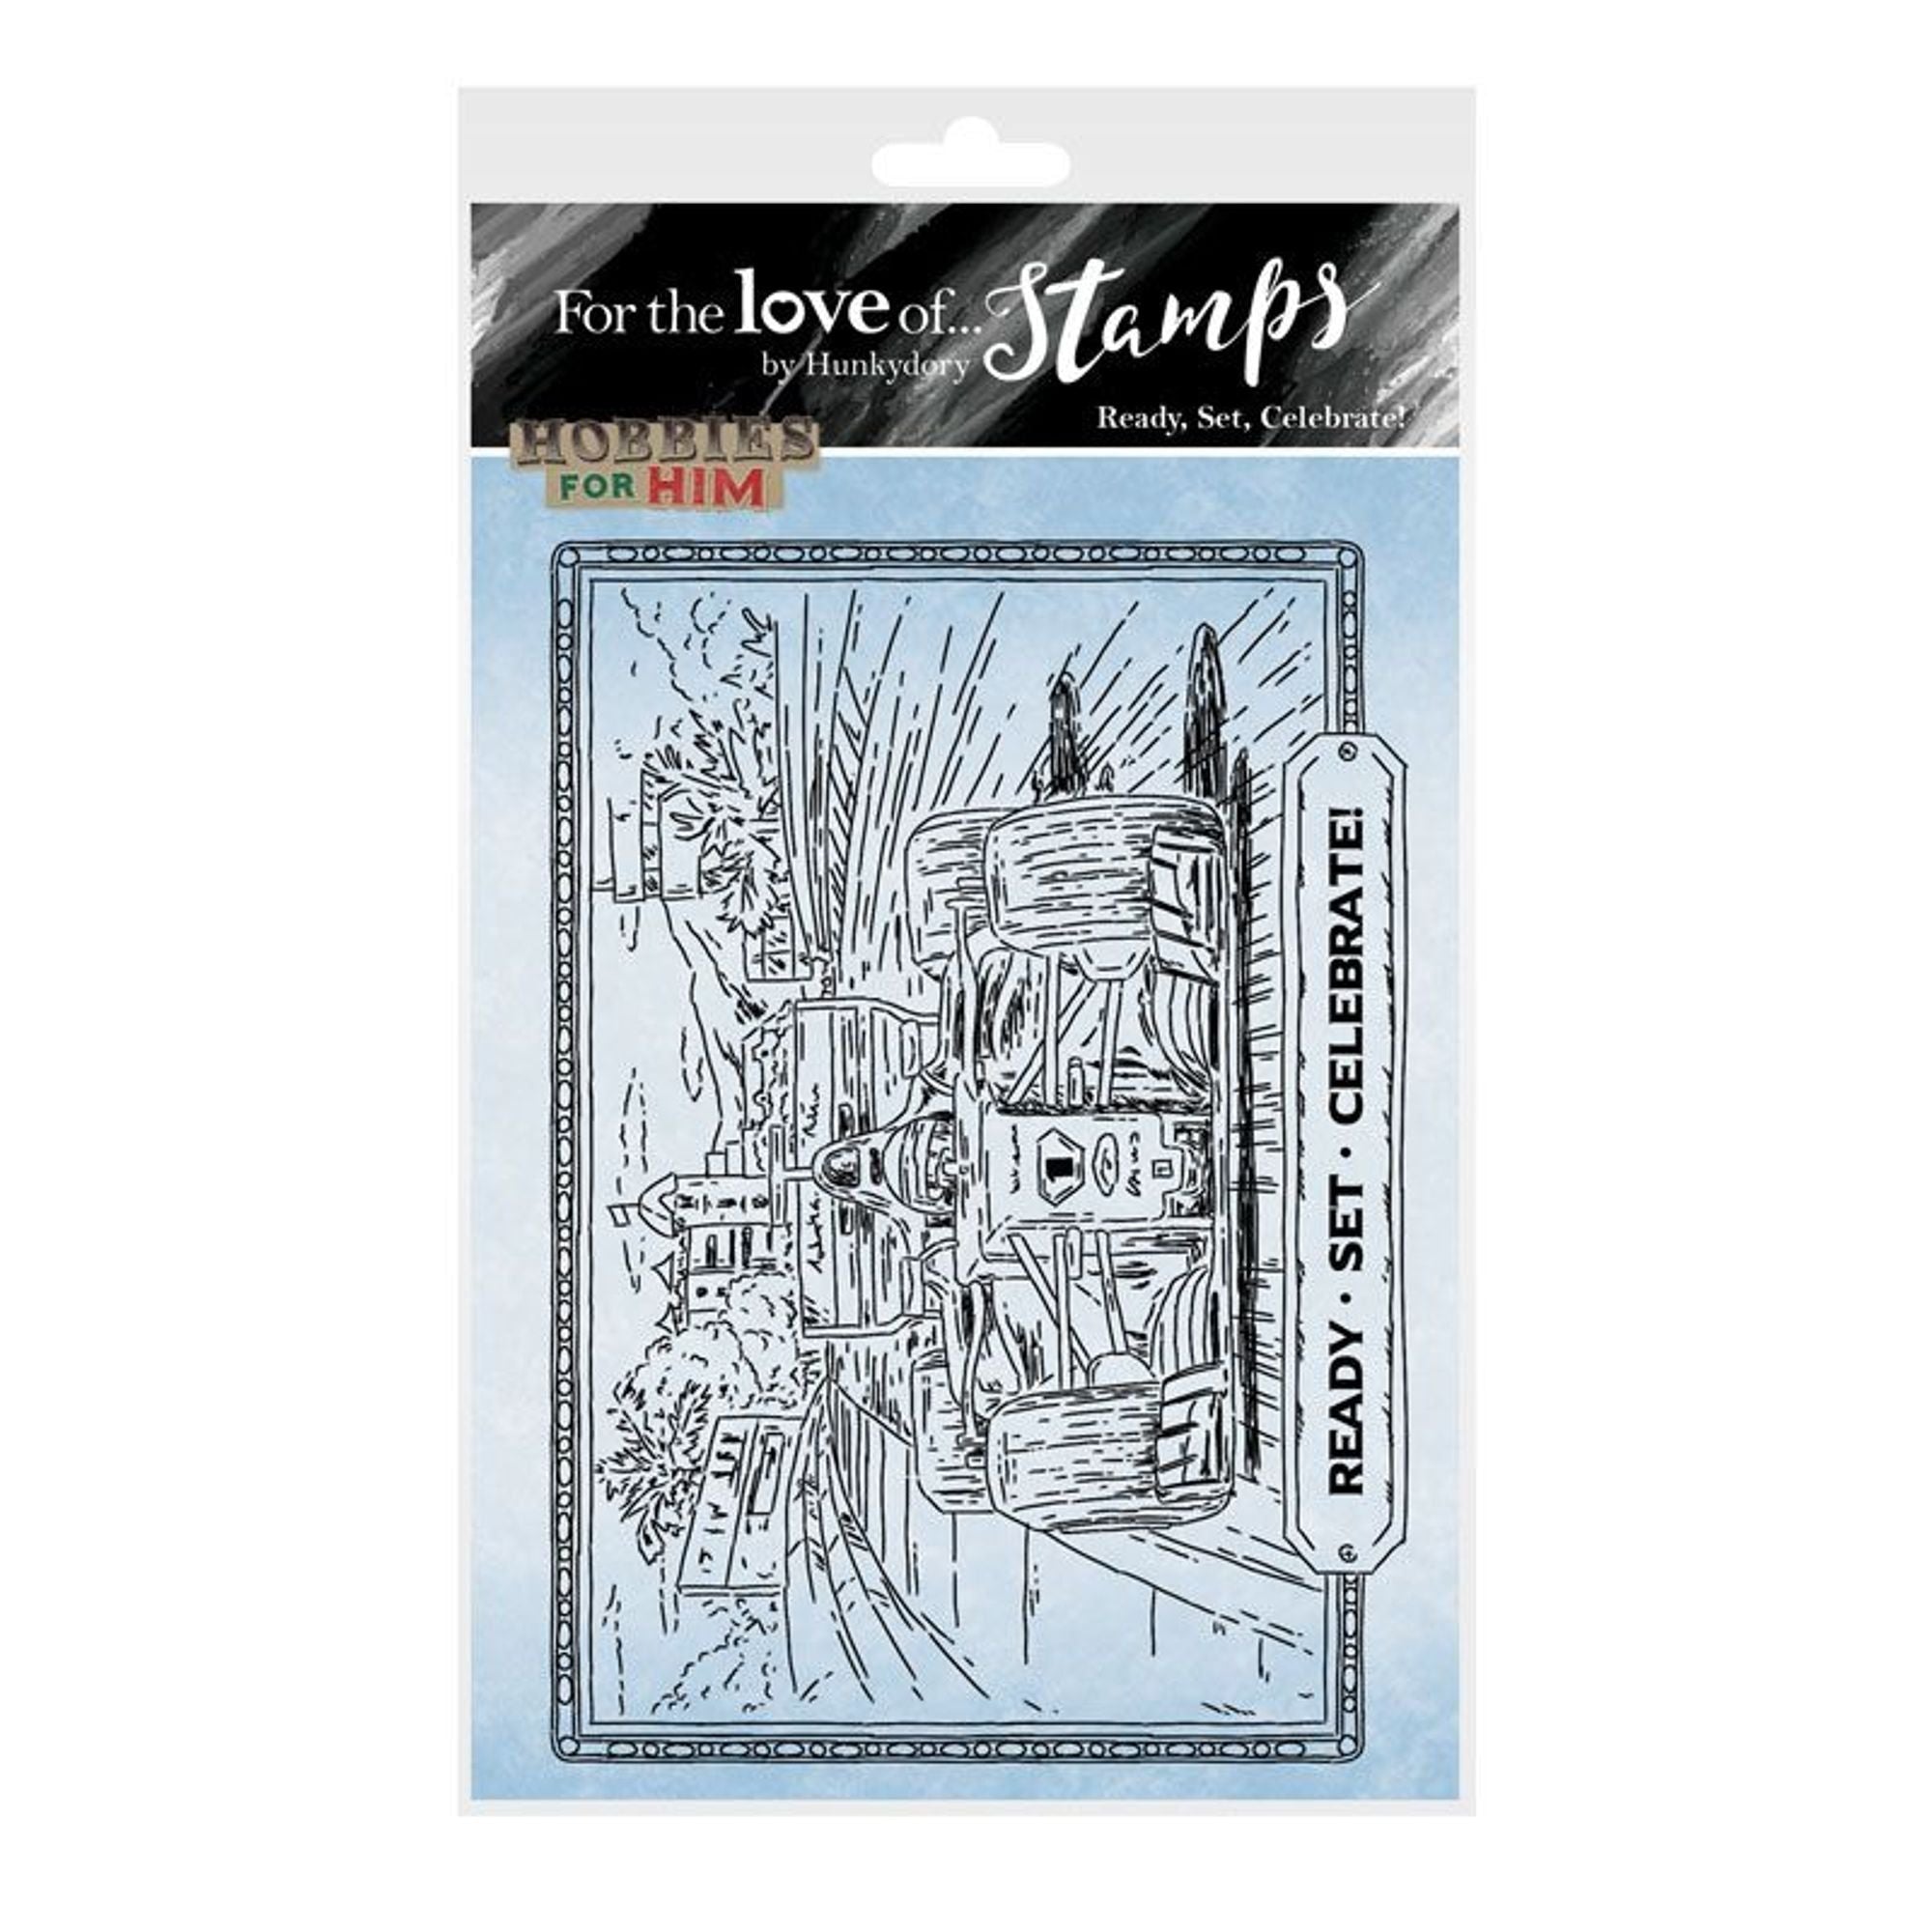 For the Love of Stamps - Ready, Set, Celebrate! A6 Stamp Set